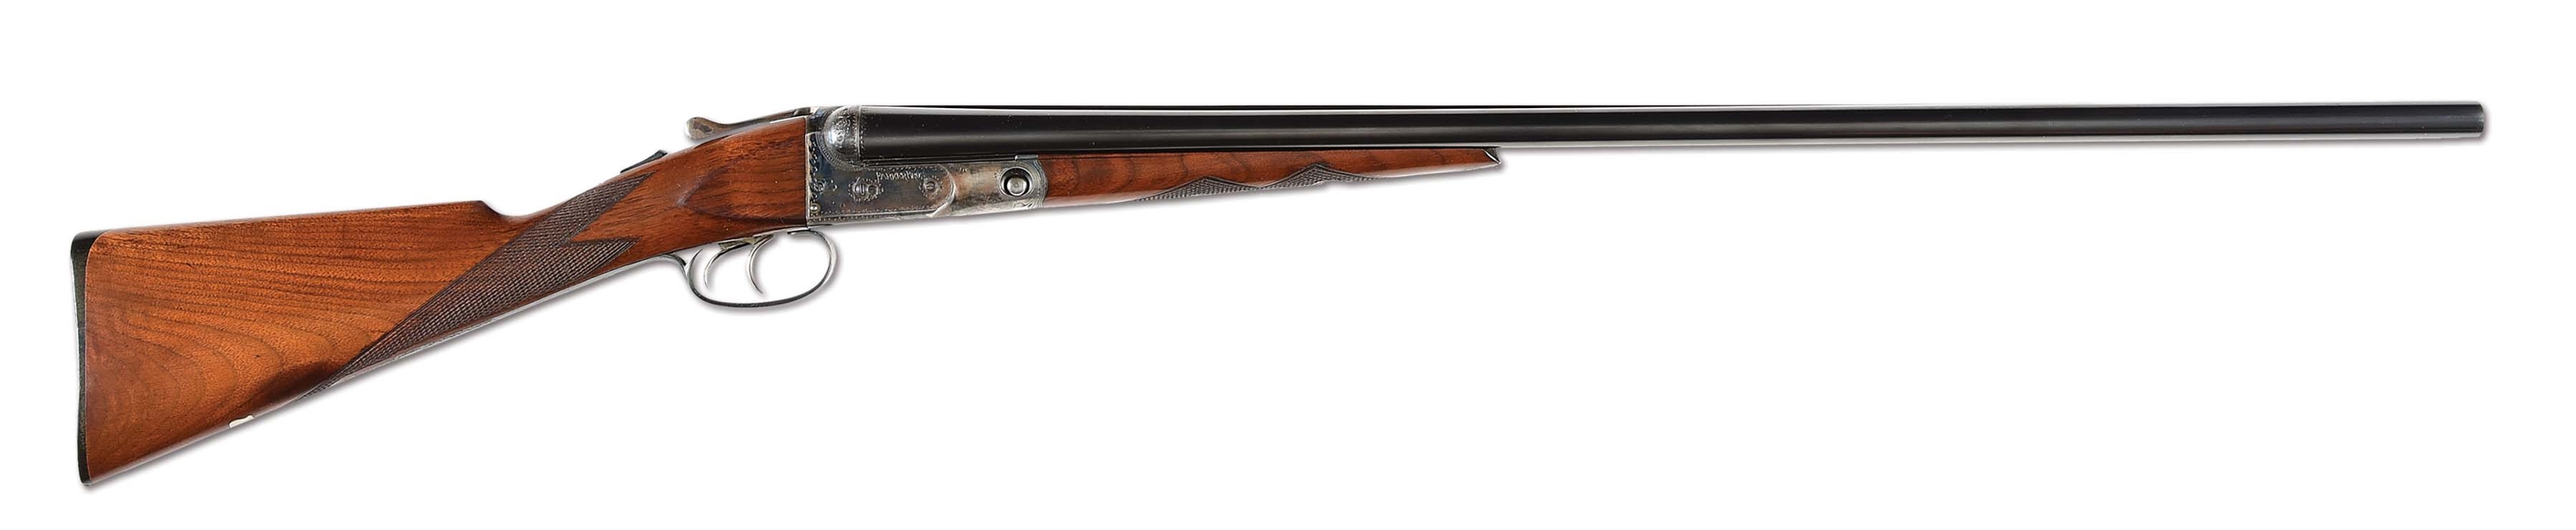 (C) EXTREMELY RARE AND FINE PARKER PHE GRADE 20 BORE SHOTGUN WITH UNIQUE FEATURES.